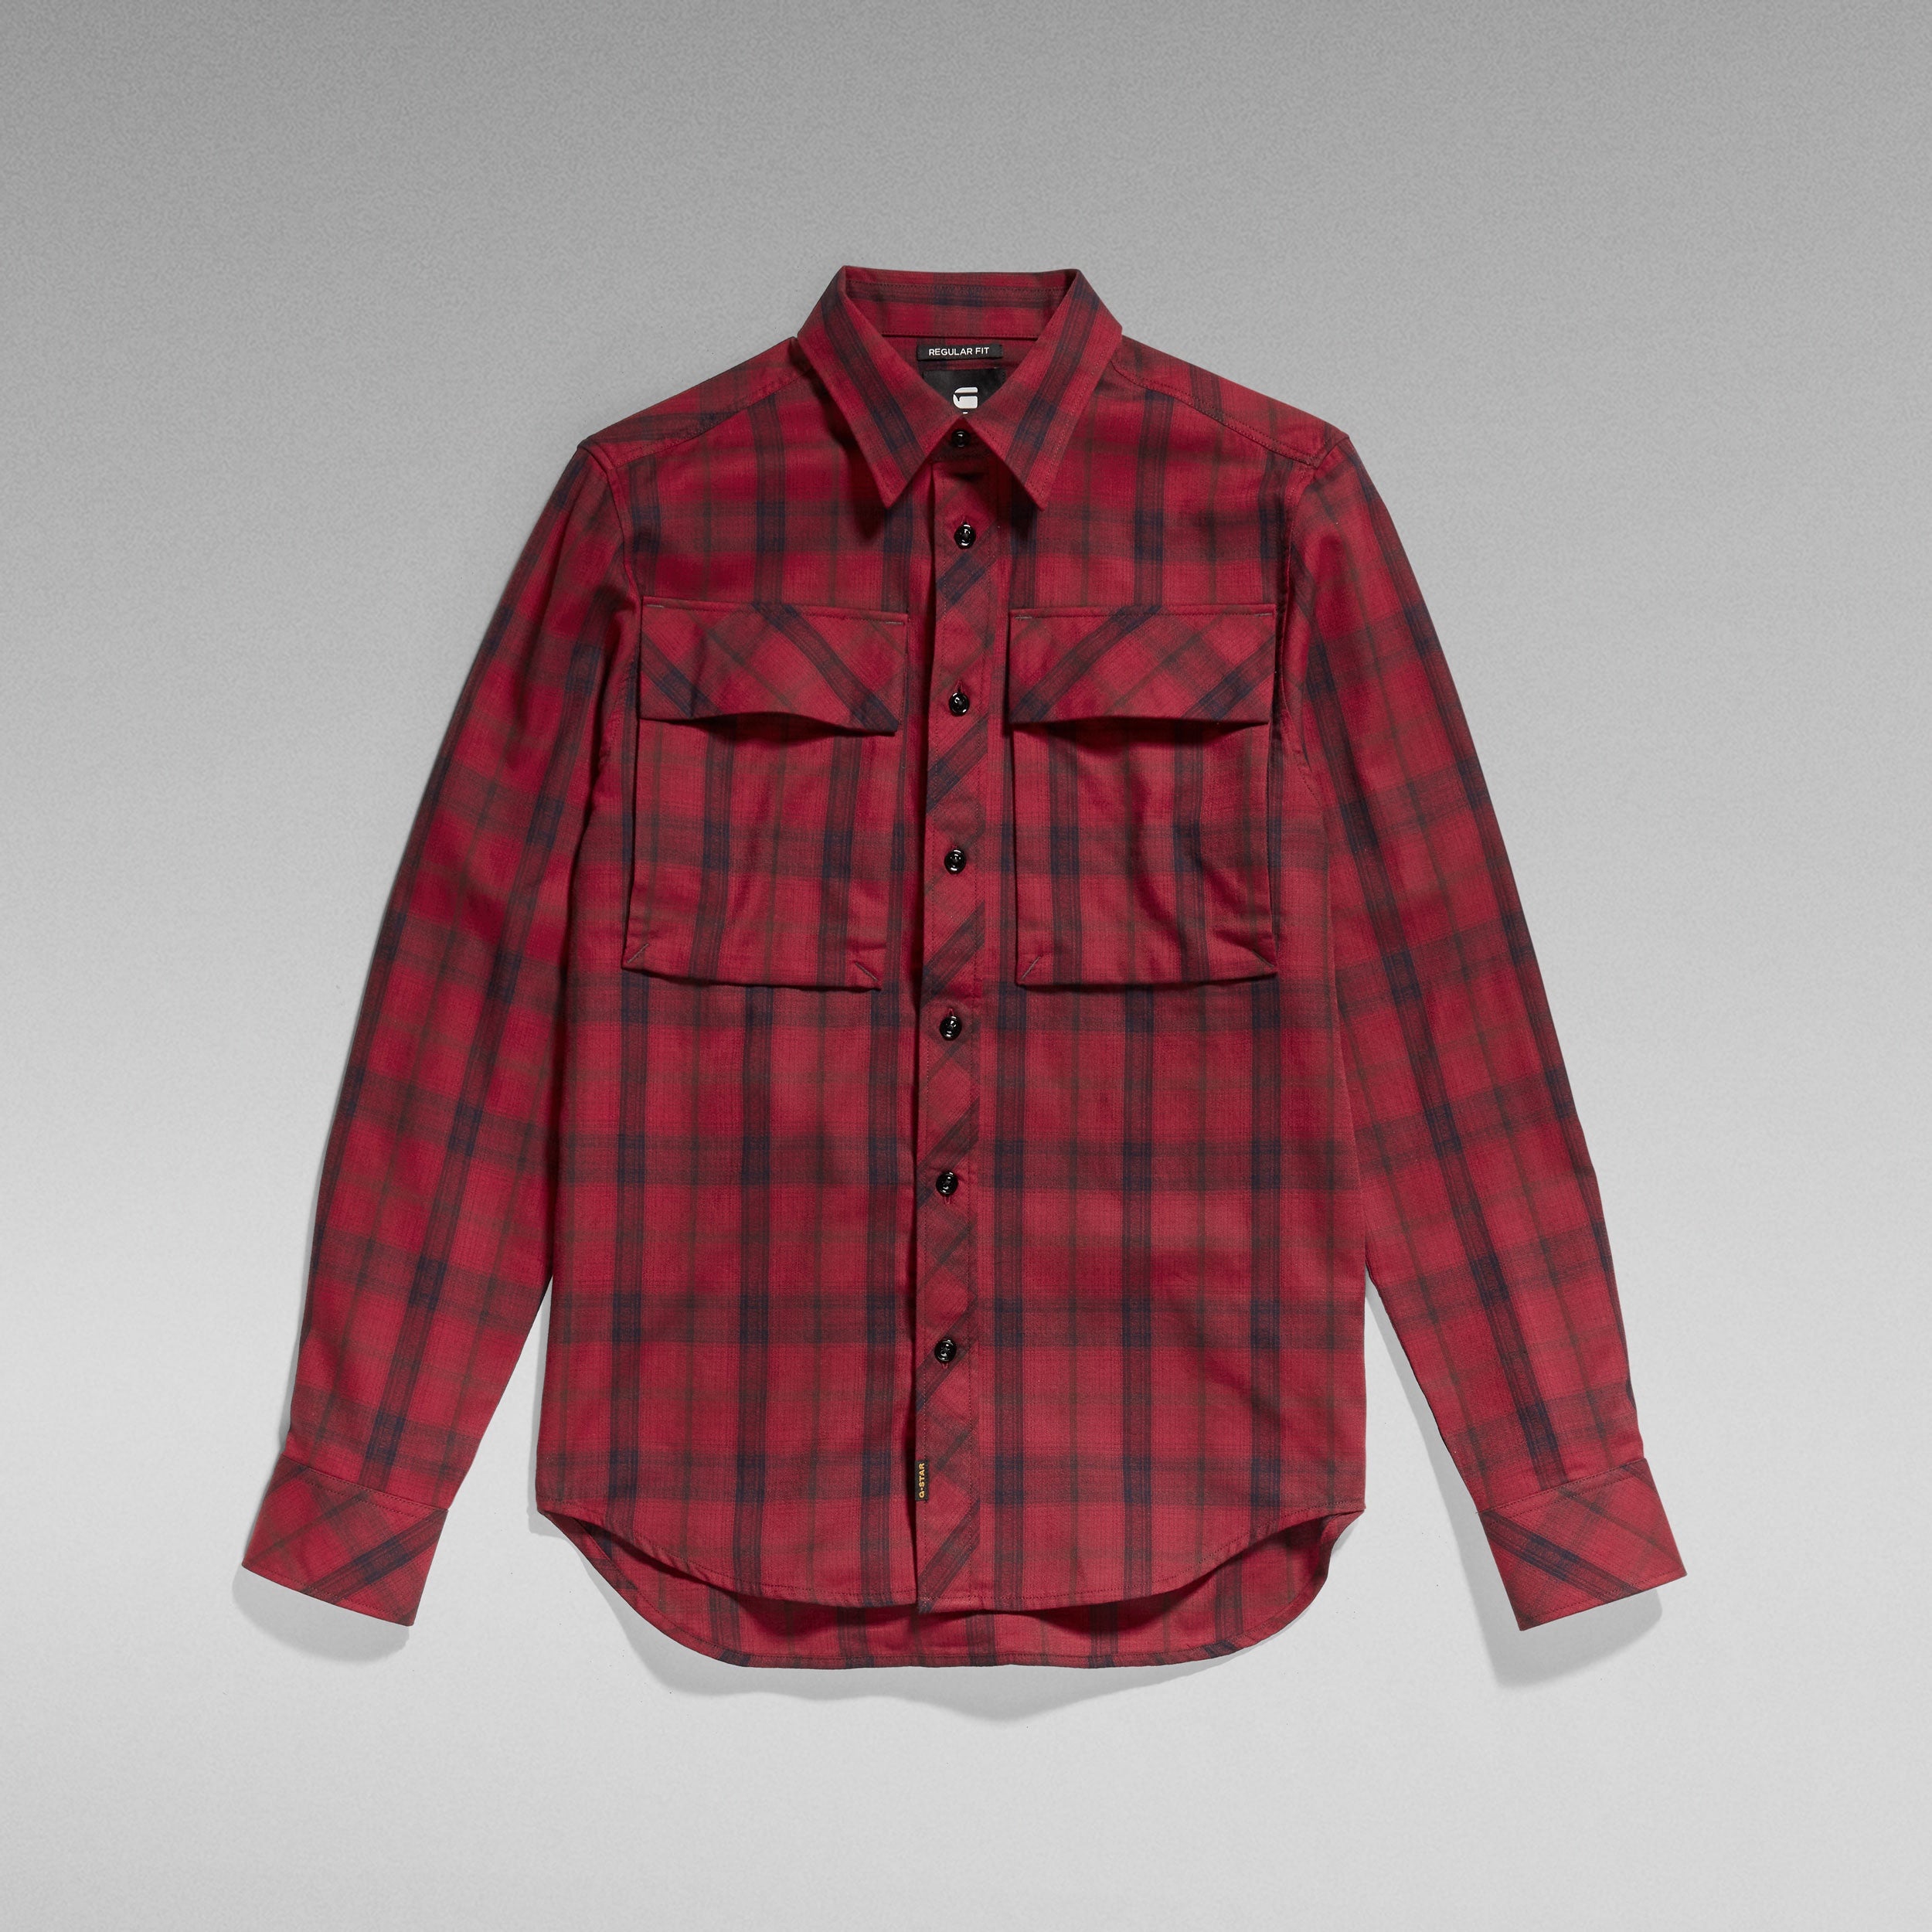 G-Star Raw Navy Seal Regular Shirt L/S - Chateaux Red Carter Check